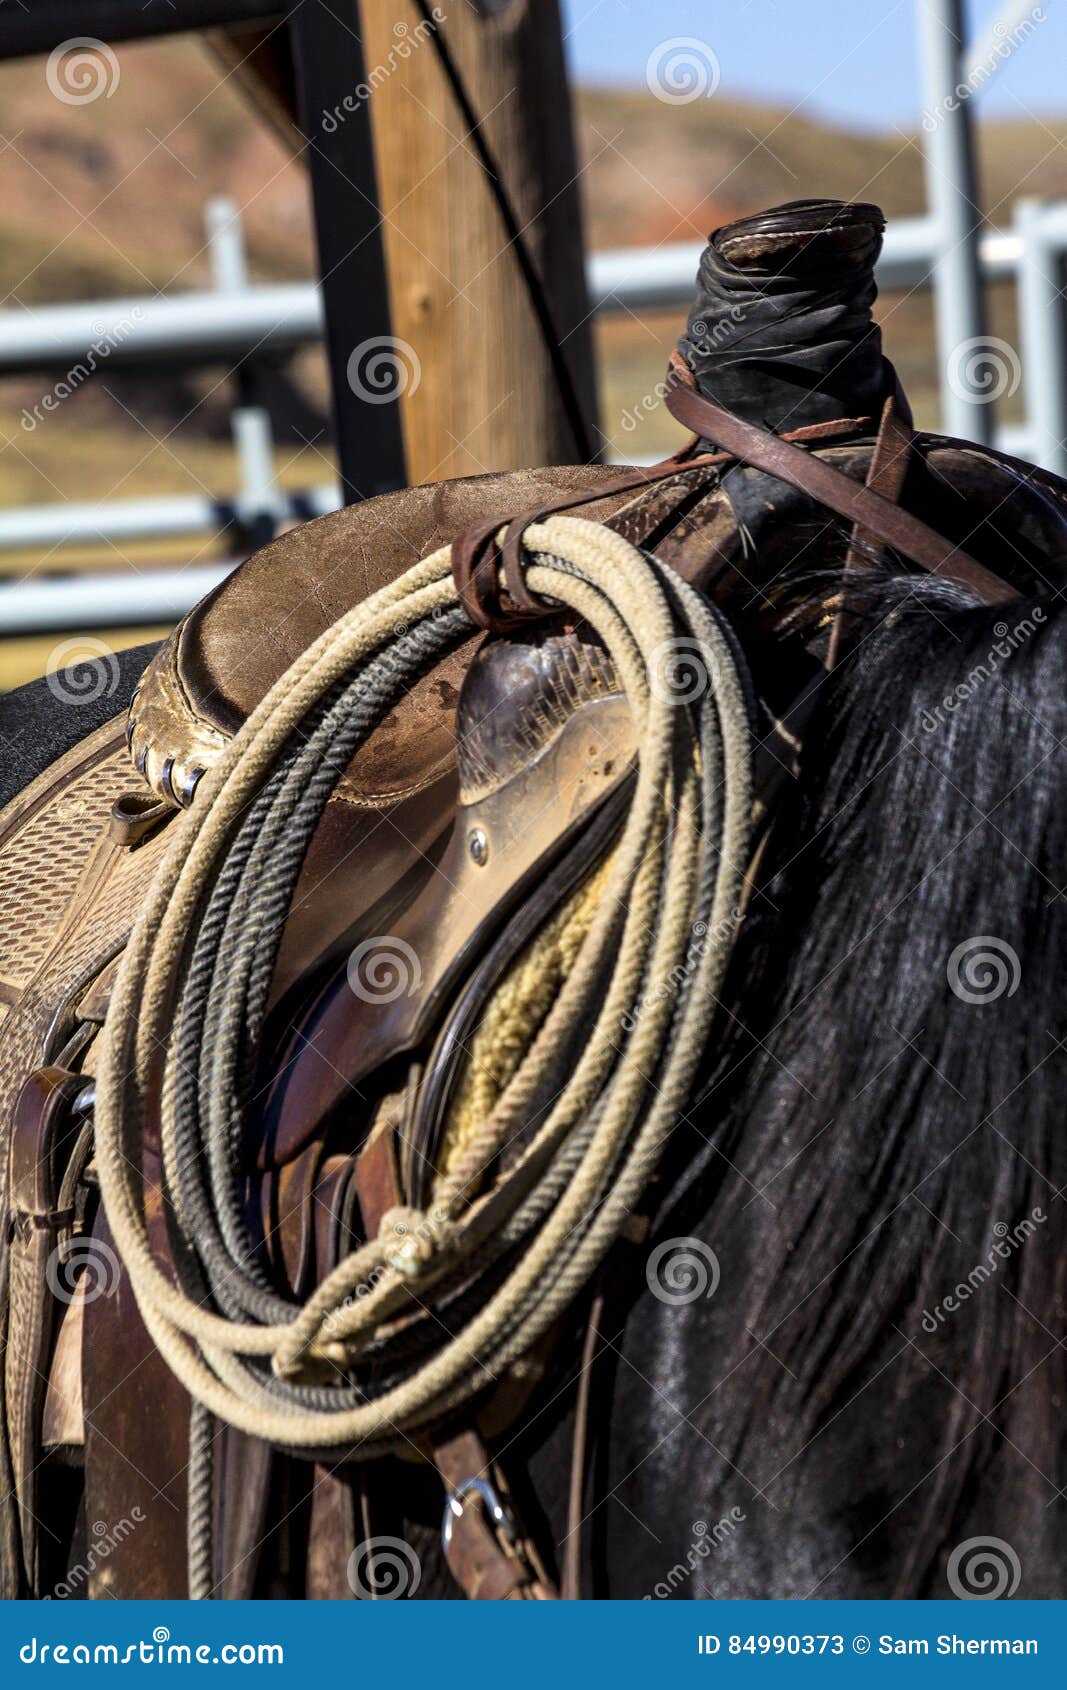 rope tied to saddle